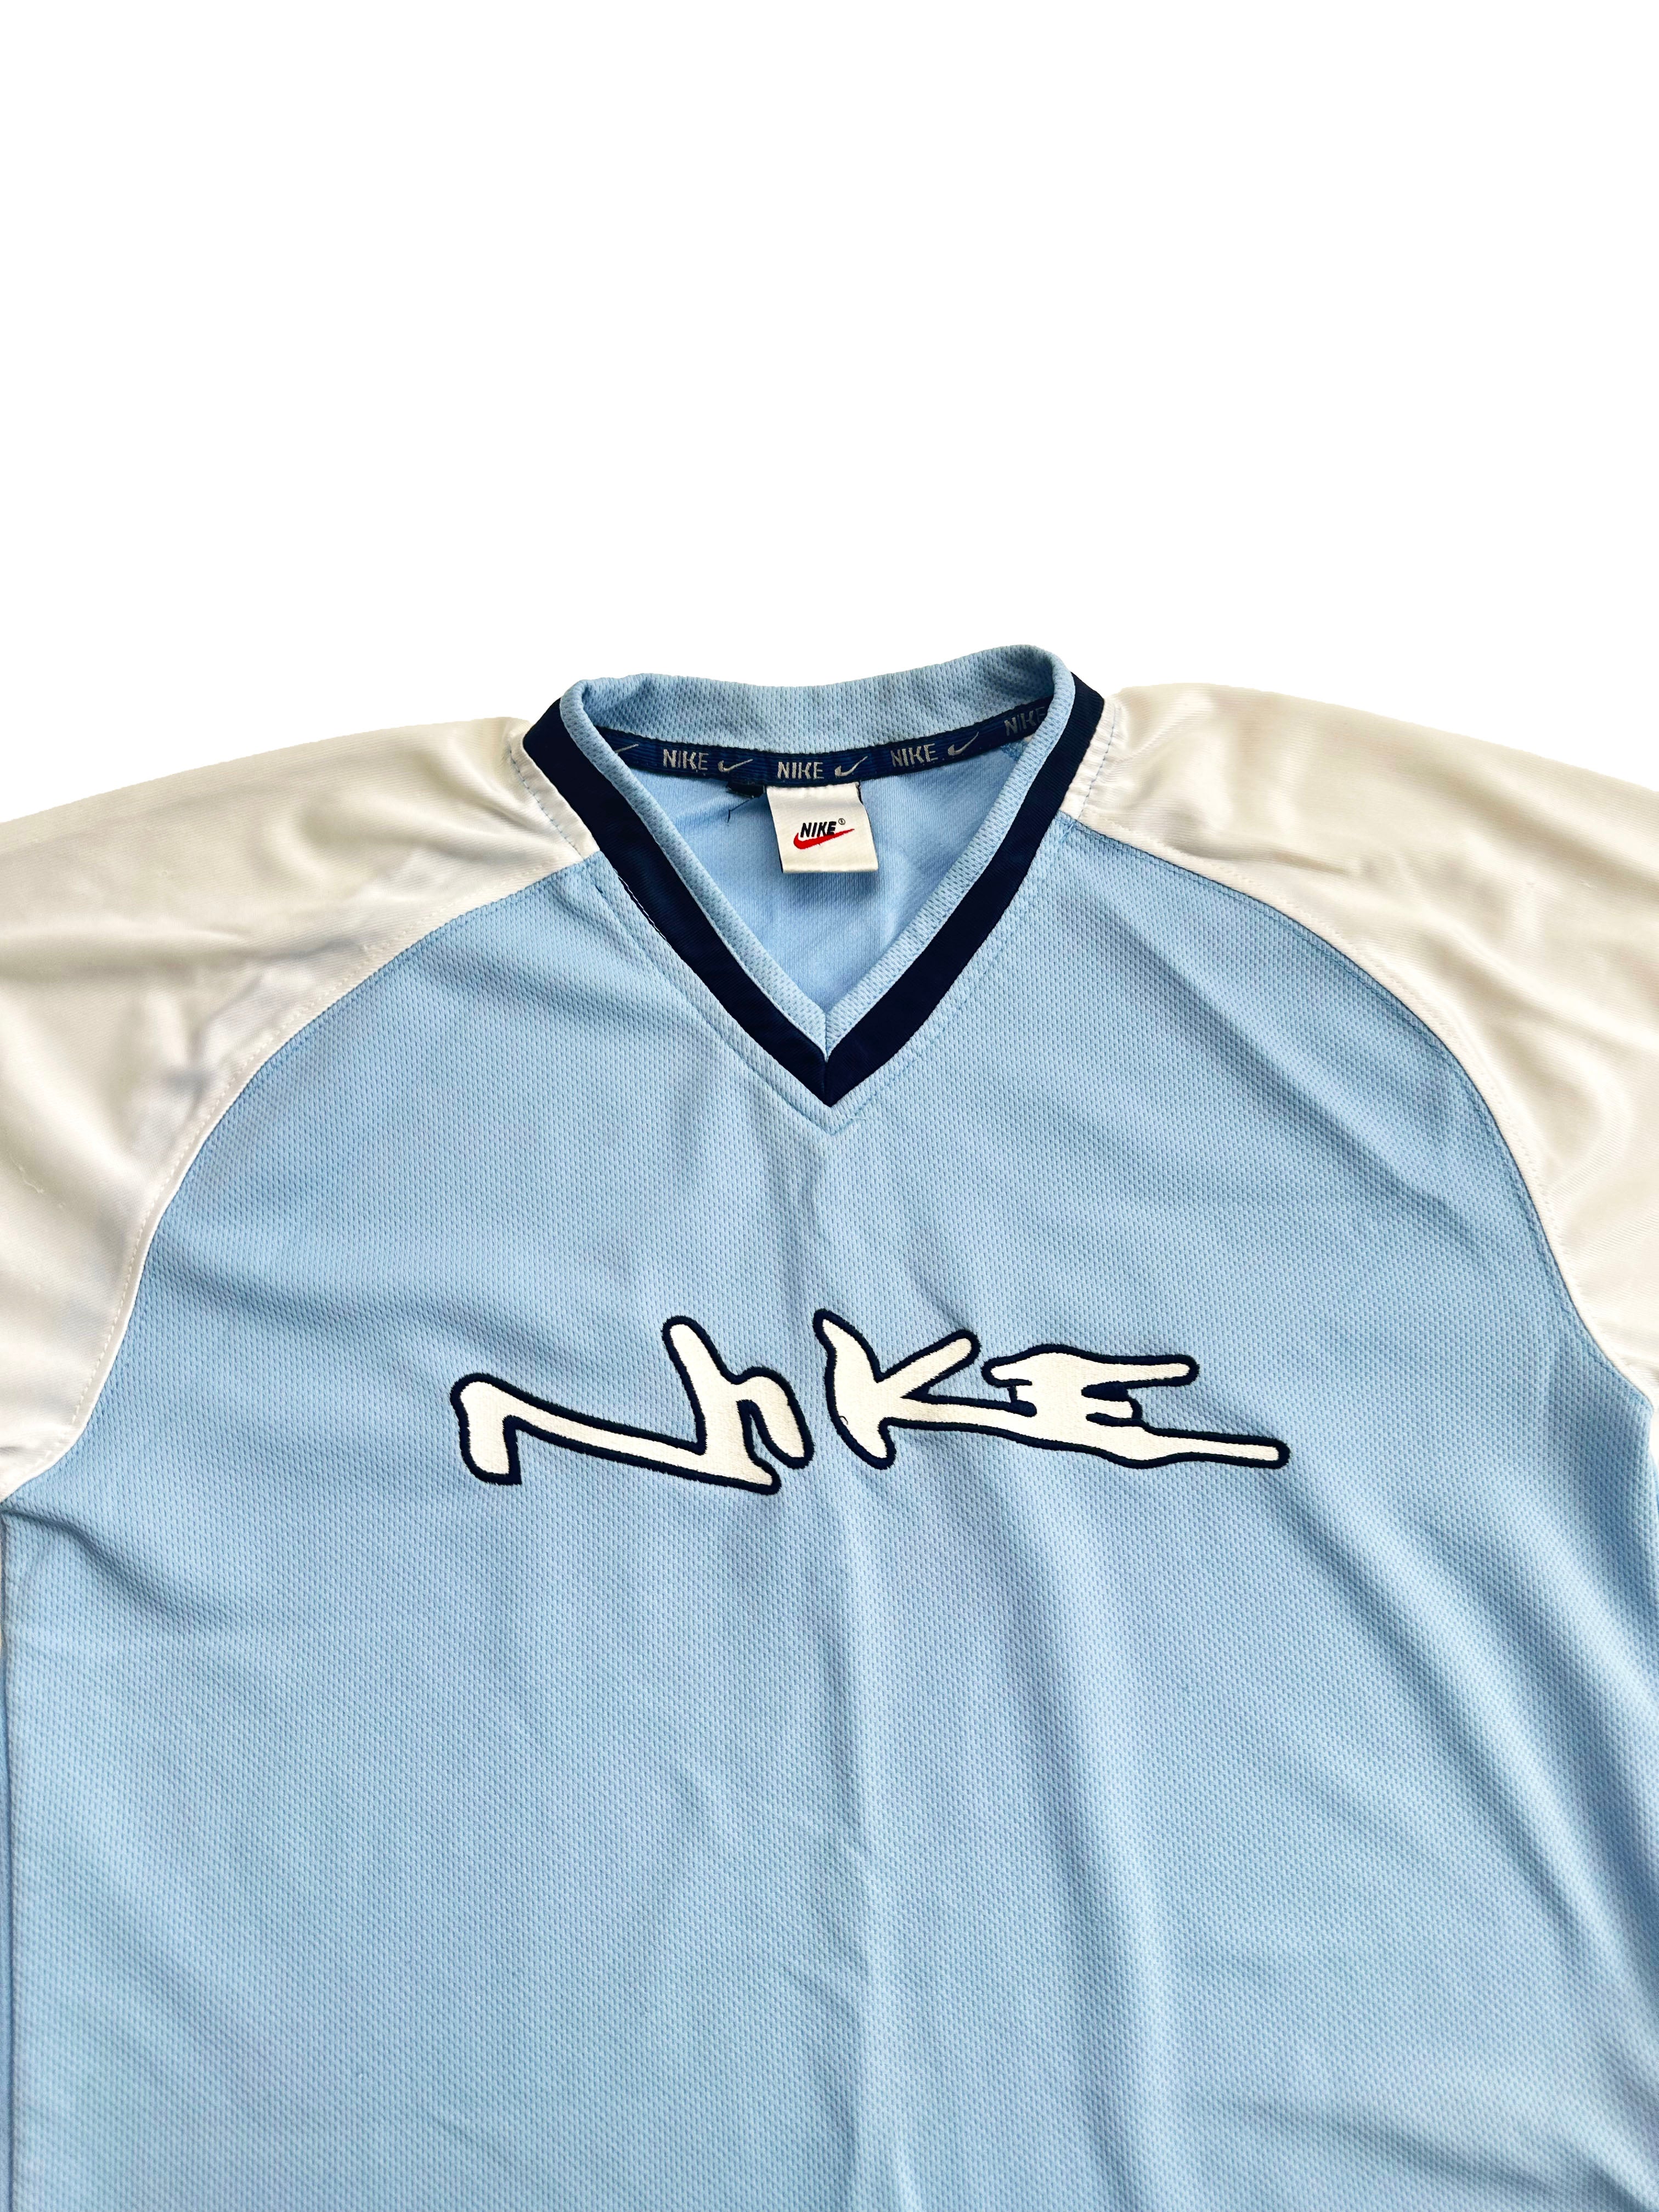 Nike Baby Blue Spell Out Top 90's